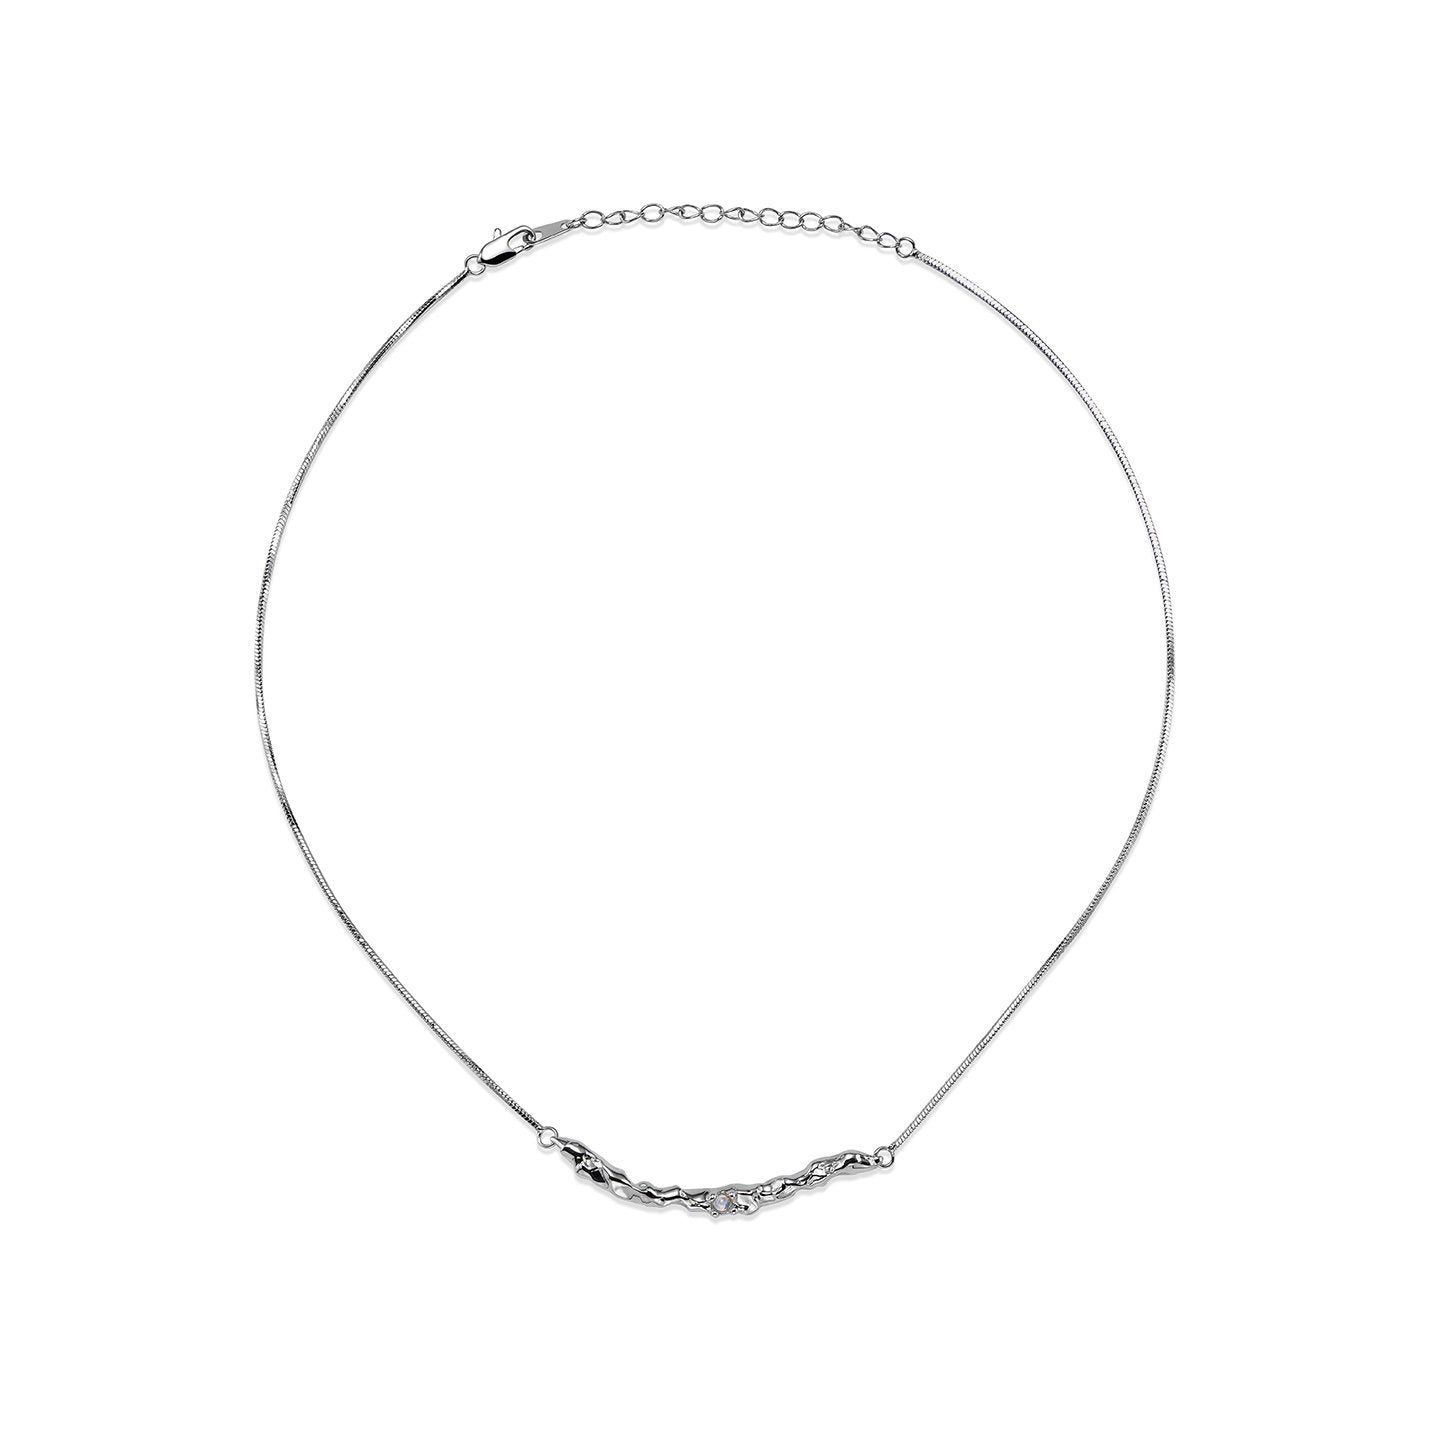 RoundFace Flowing Silver Necklace